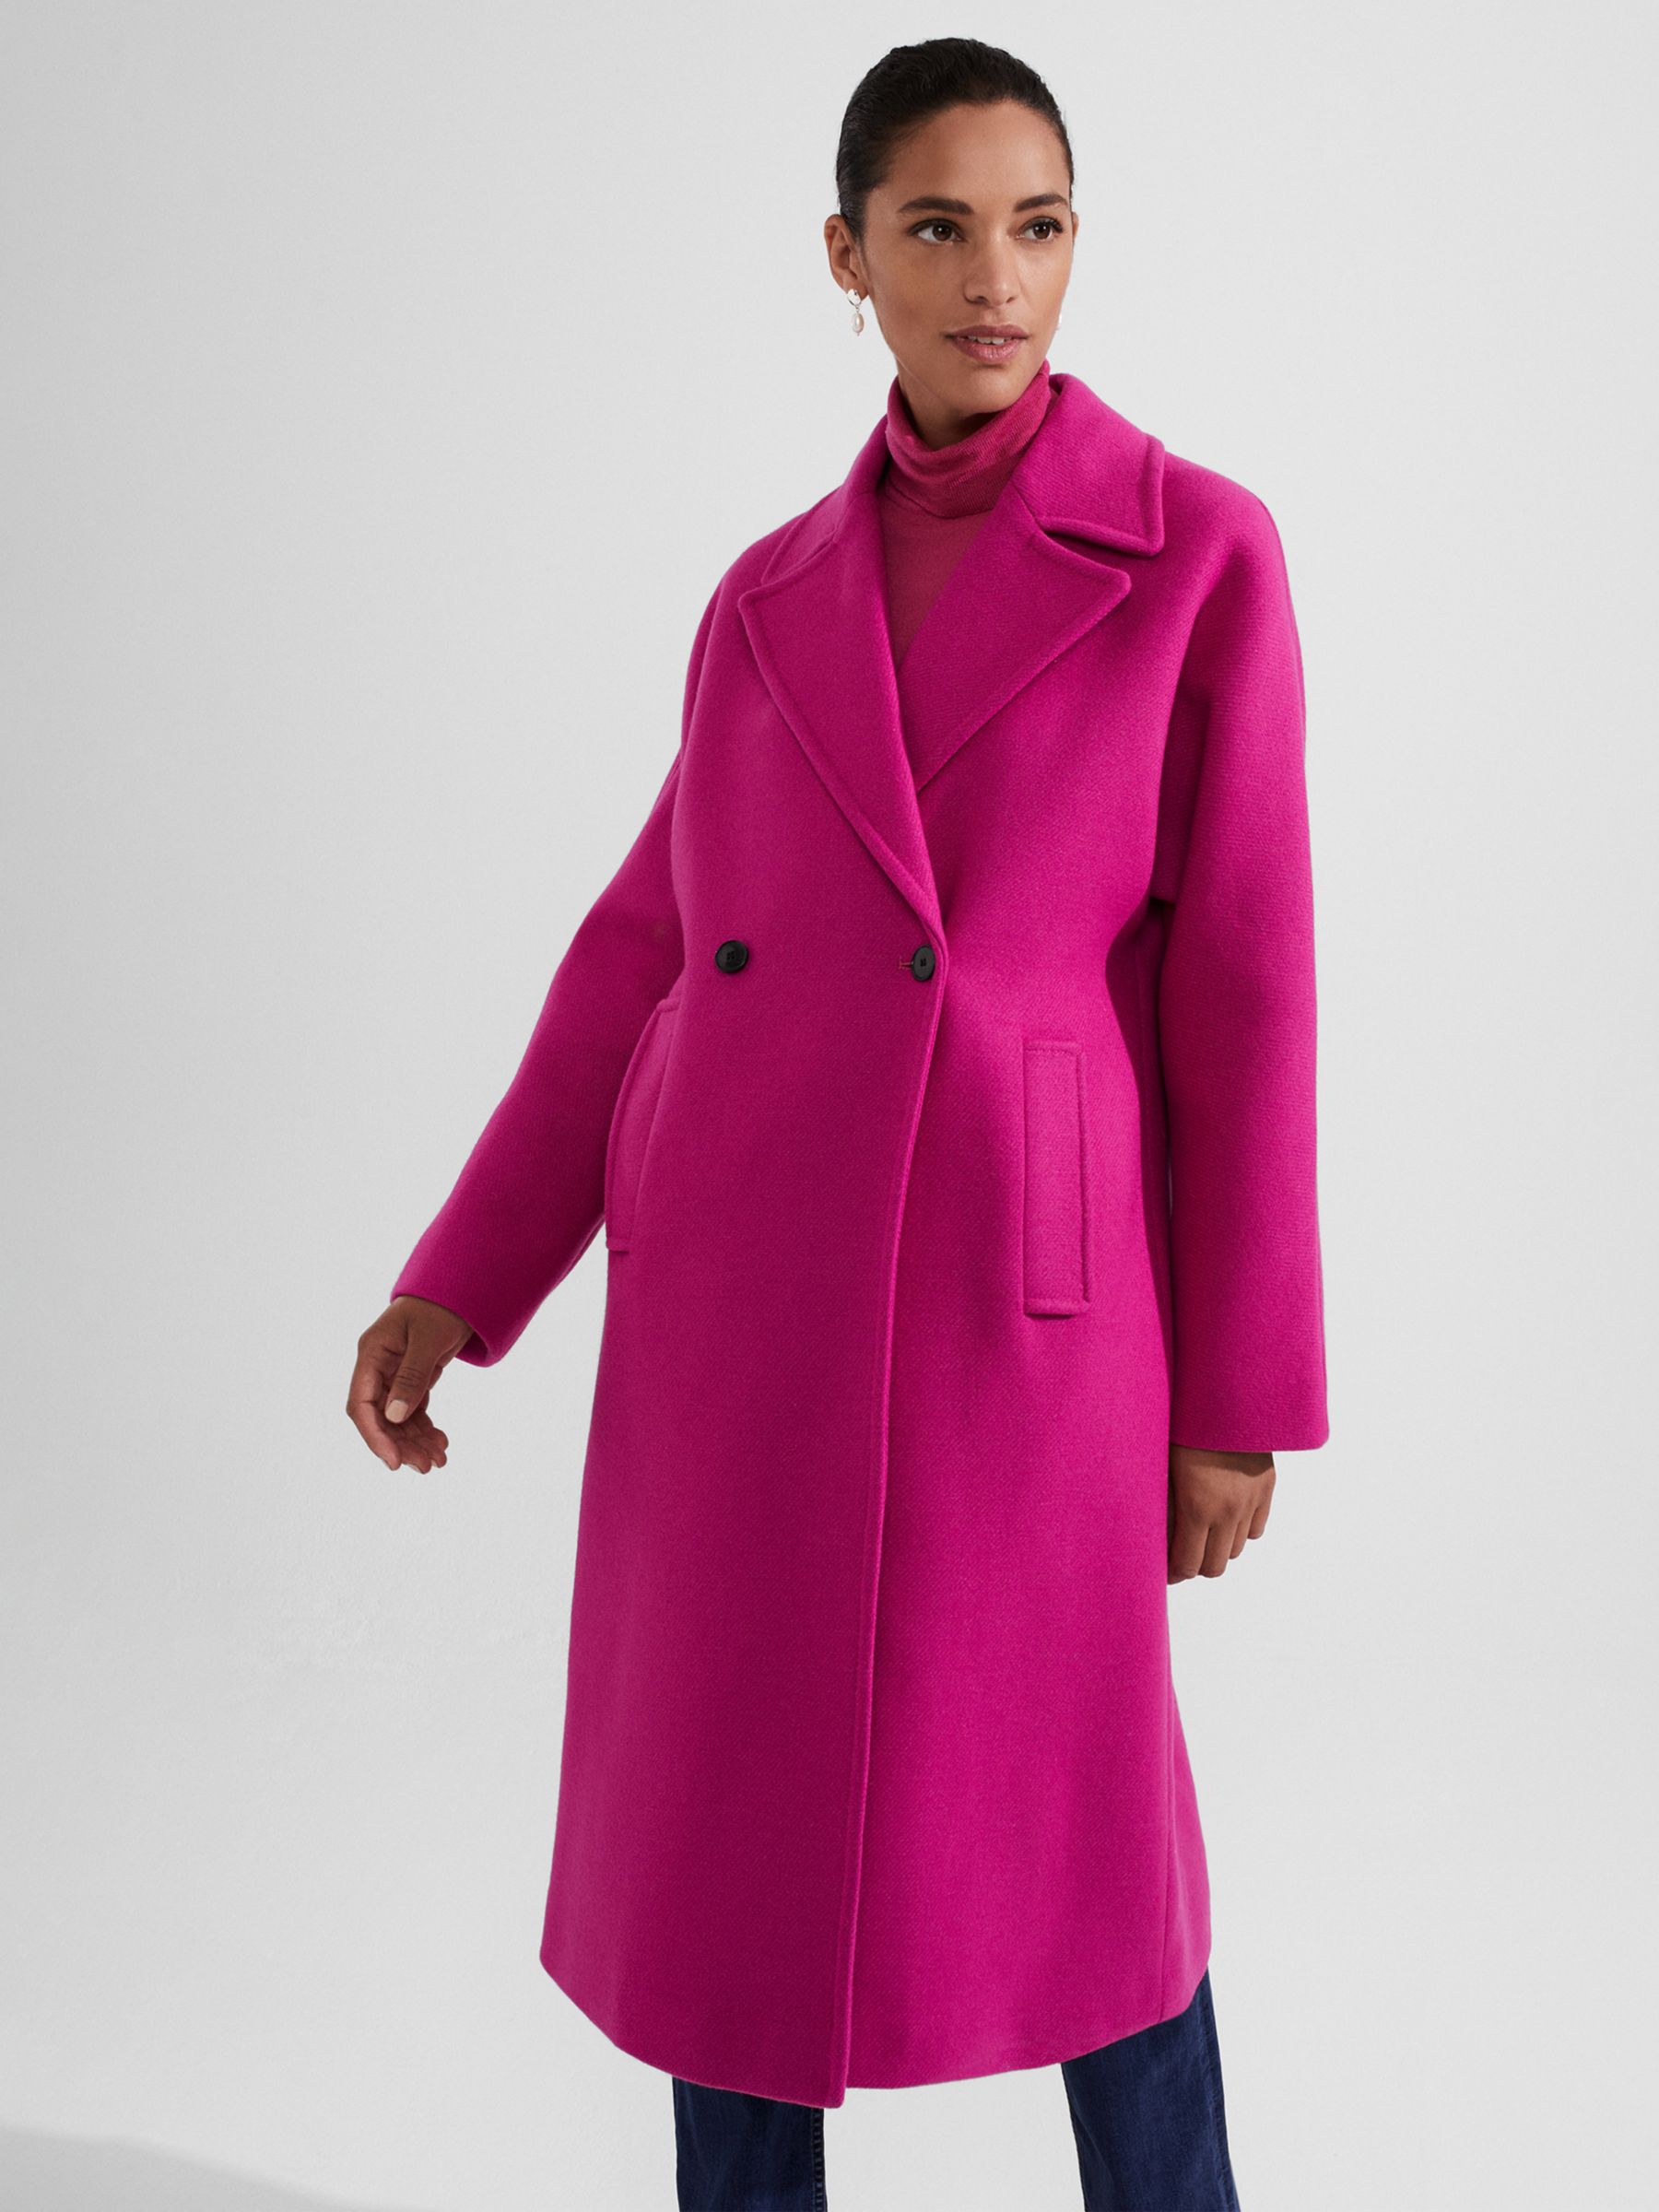 Buy Hobbs Carine Wool Blend Relaxed Fit Coat, Bright Pink Online at johnlewis.com